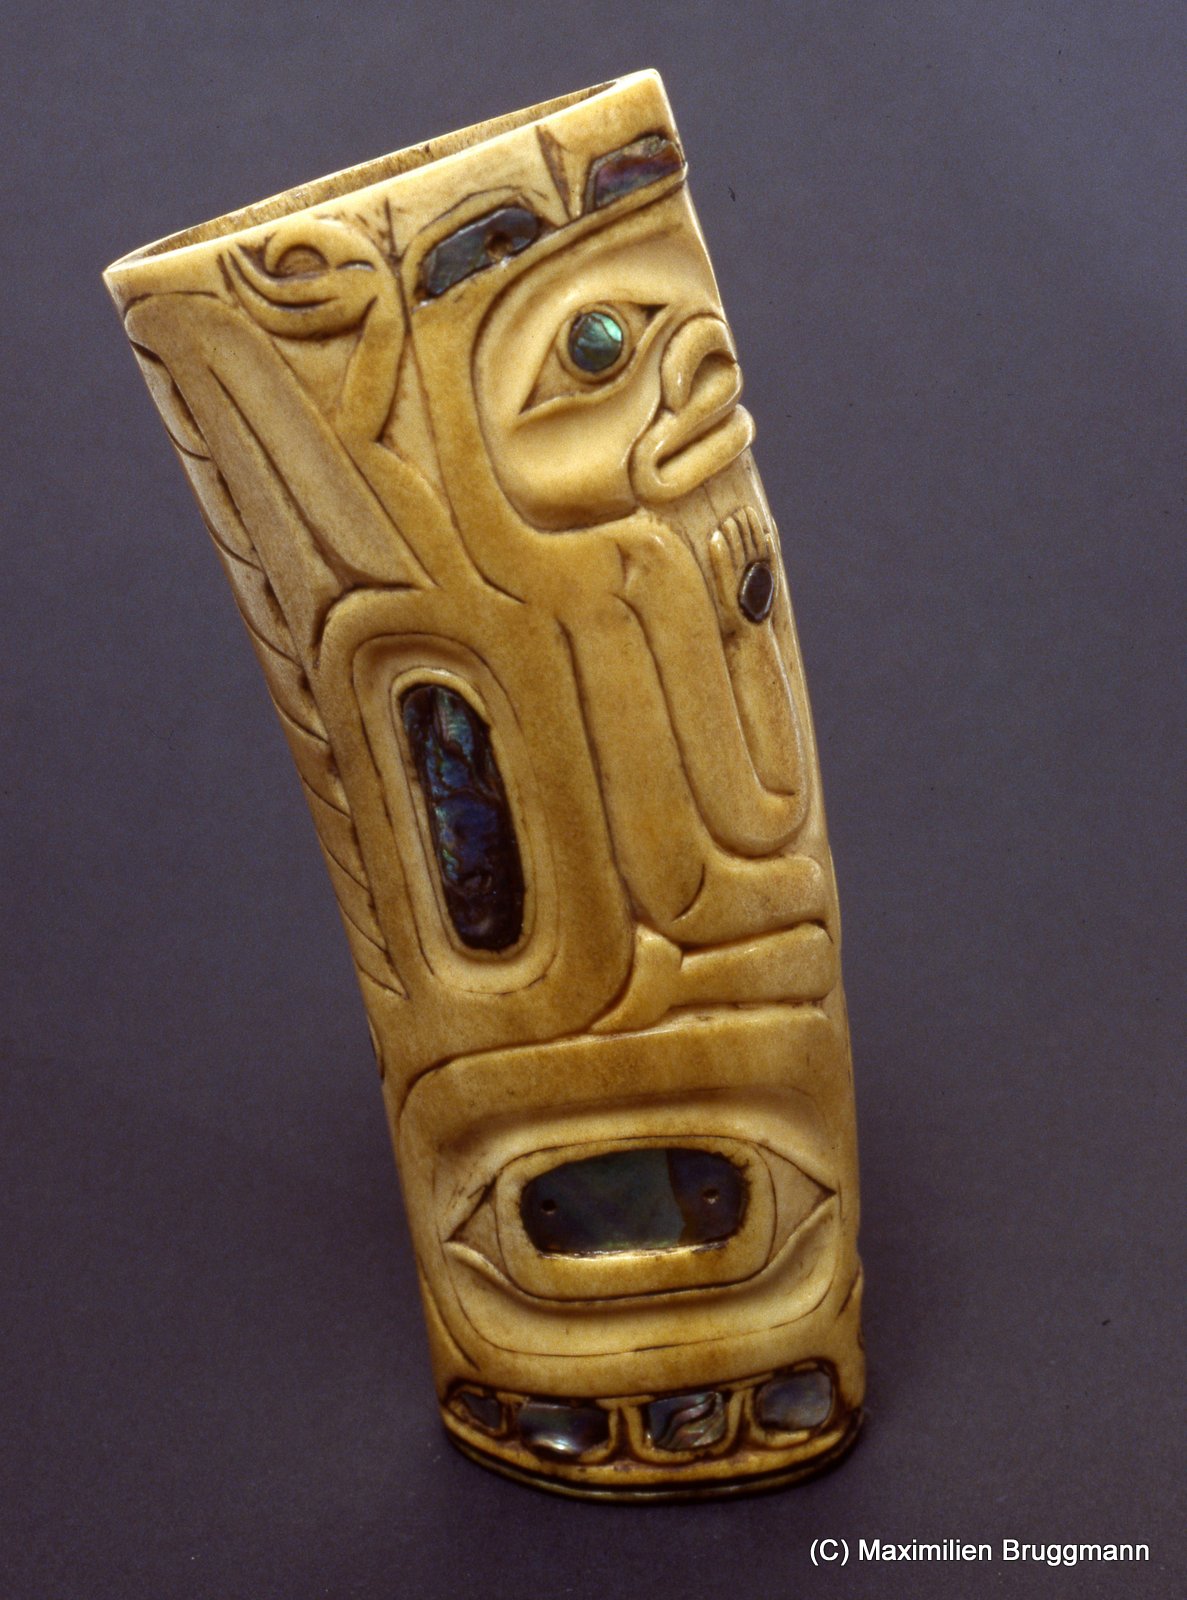 32 This drinking vessel is carved out of the tusk of a walrus and decorated with haliotis shell. The partially visible figure is probably an anthropomorphic bear. The cup originated in the same region as the salmon charm described above. (14 cm; NMM)